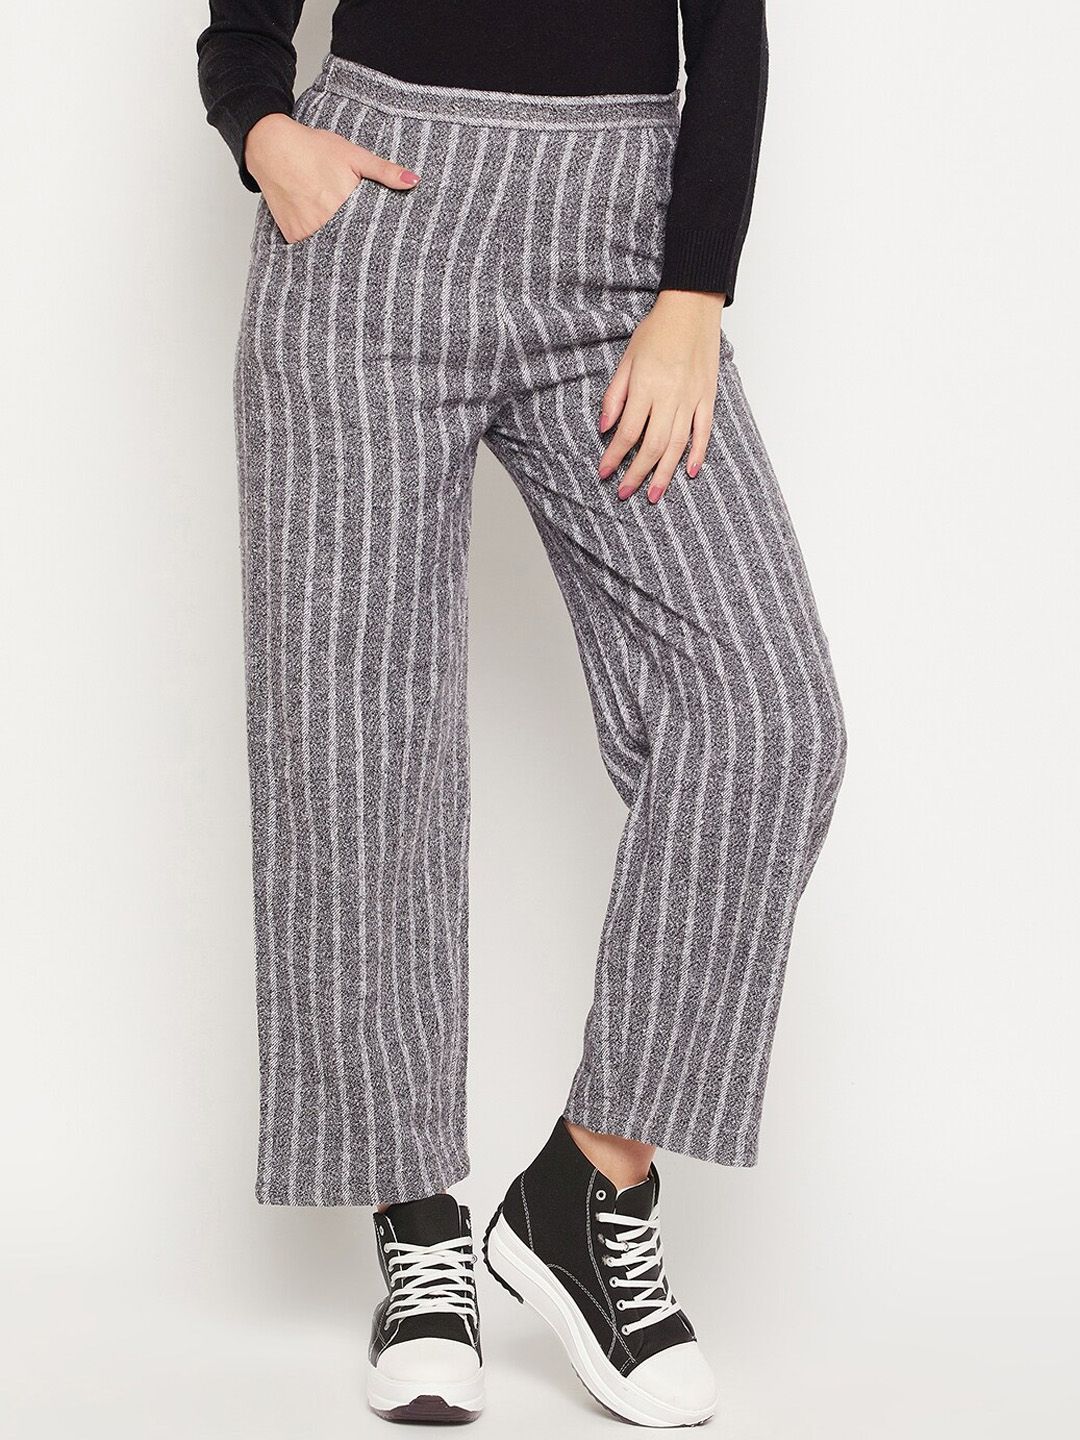 Bitterlime Women Striped Relaxed Flared Wrinkle Free Cotton Trousers Price in India